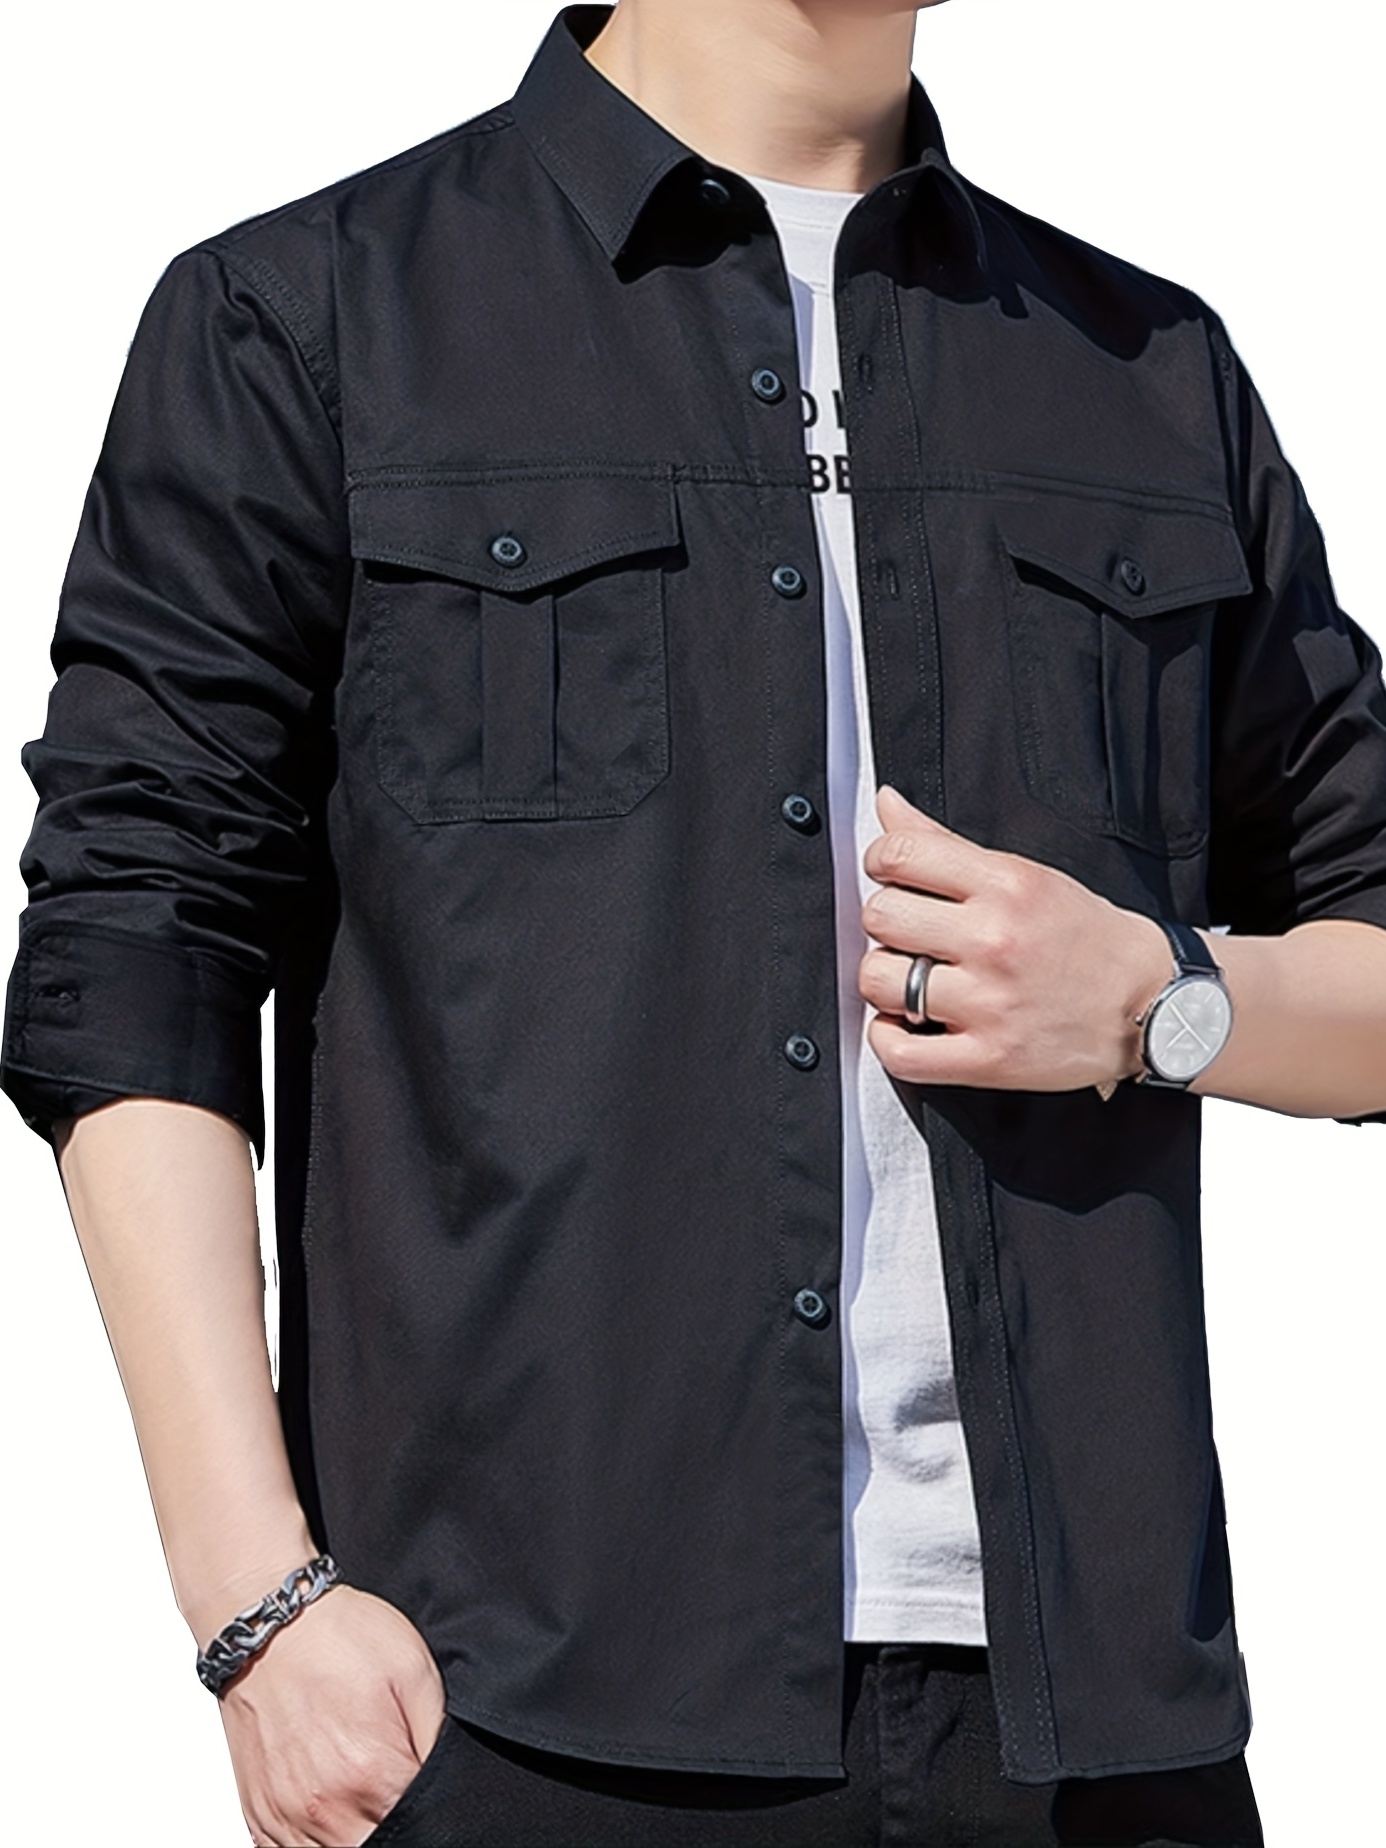 Men's Solid Cargo Shirts With Multi Pockets, Casual Lapel Button